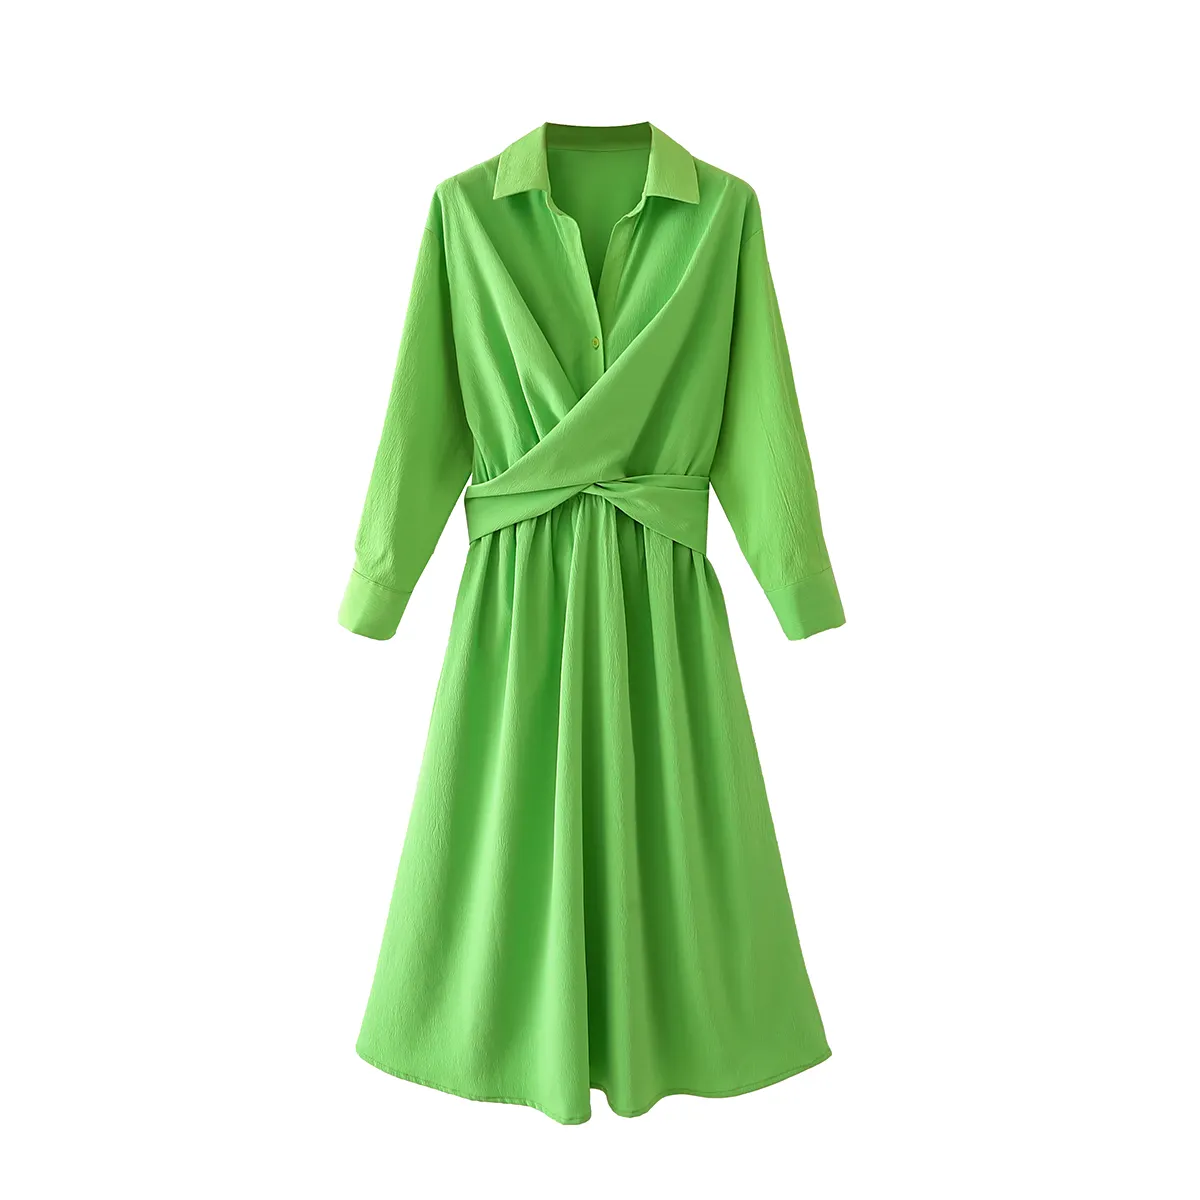 Casual Dresses New New Arrival Green Color Turn Down Collar Long Sleeve Women Casual Fashion Long Shirt Dress